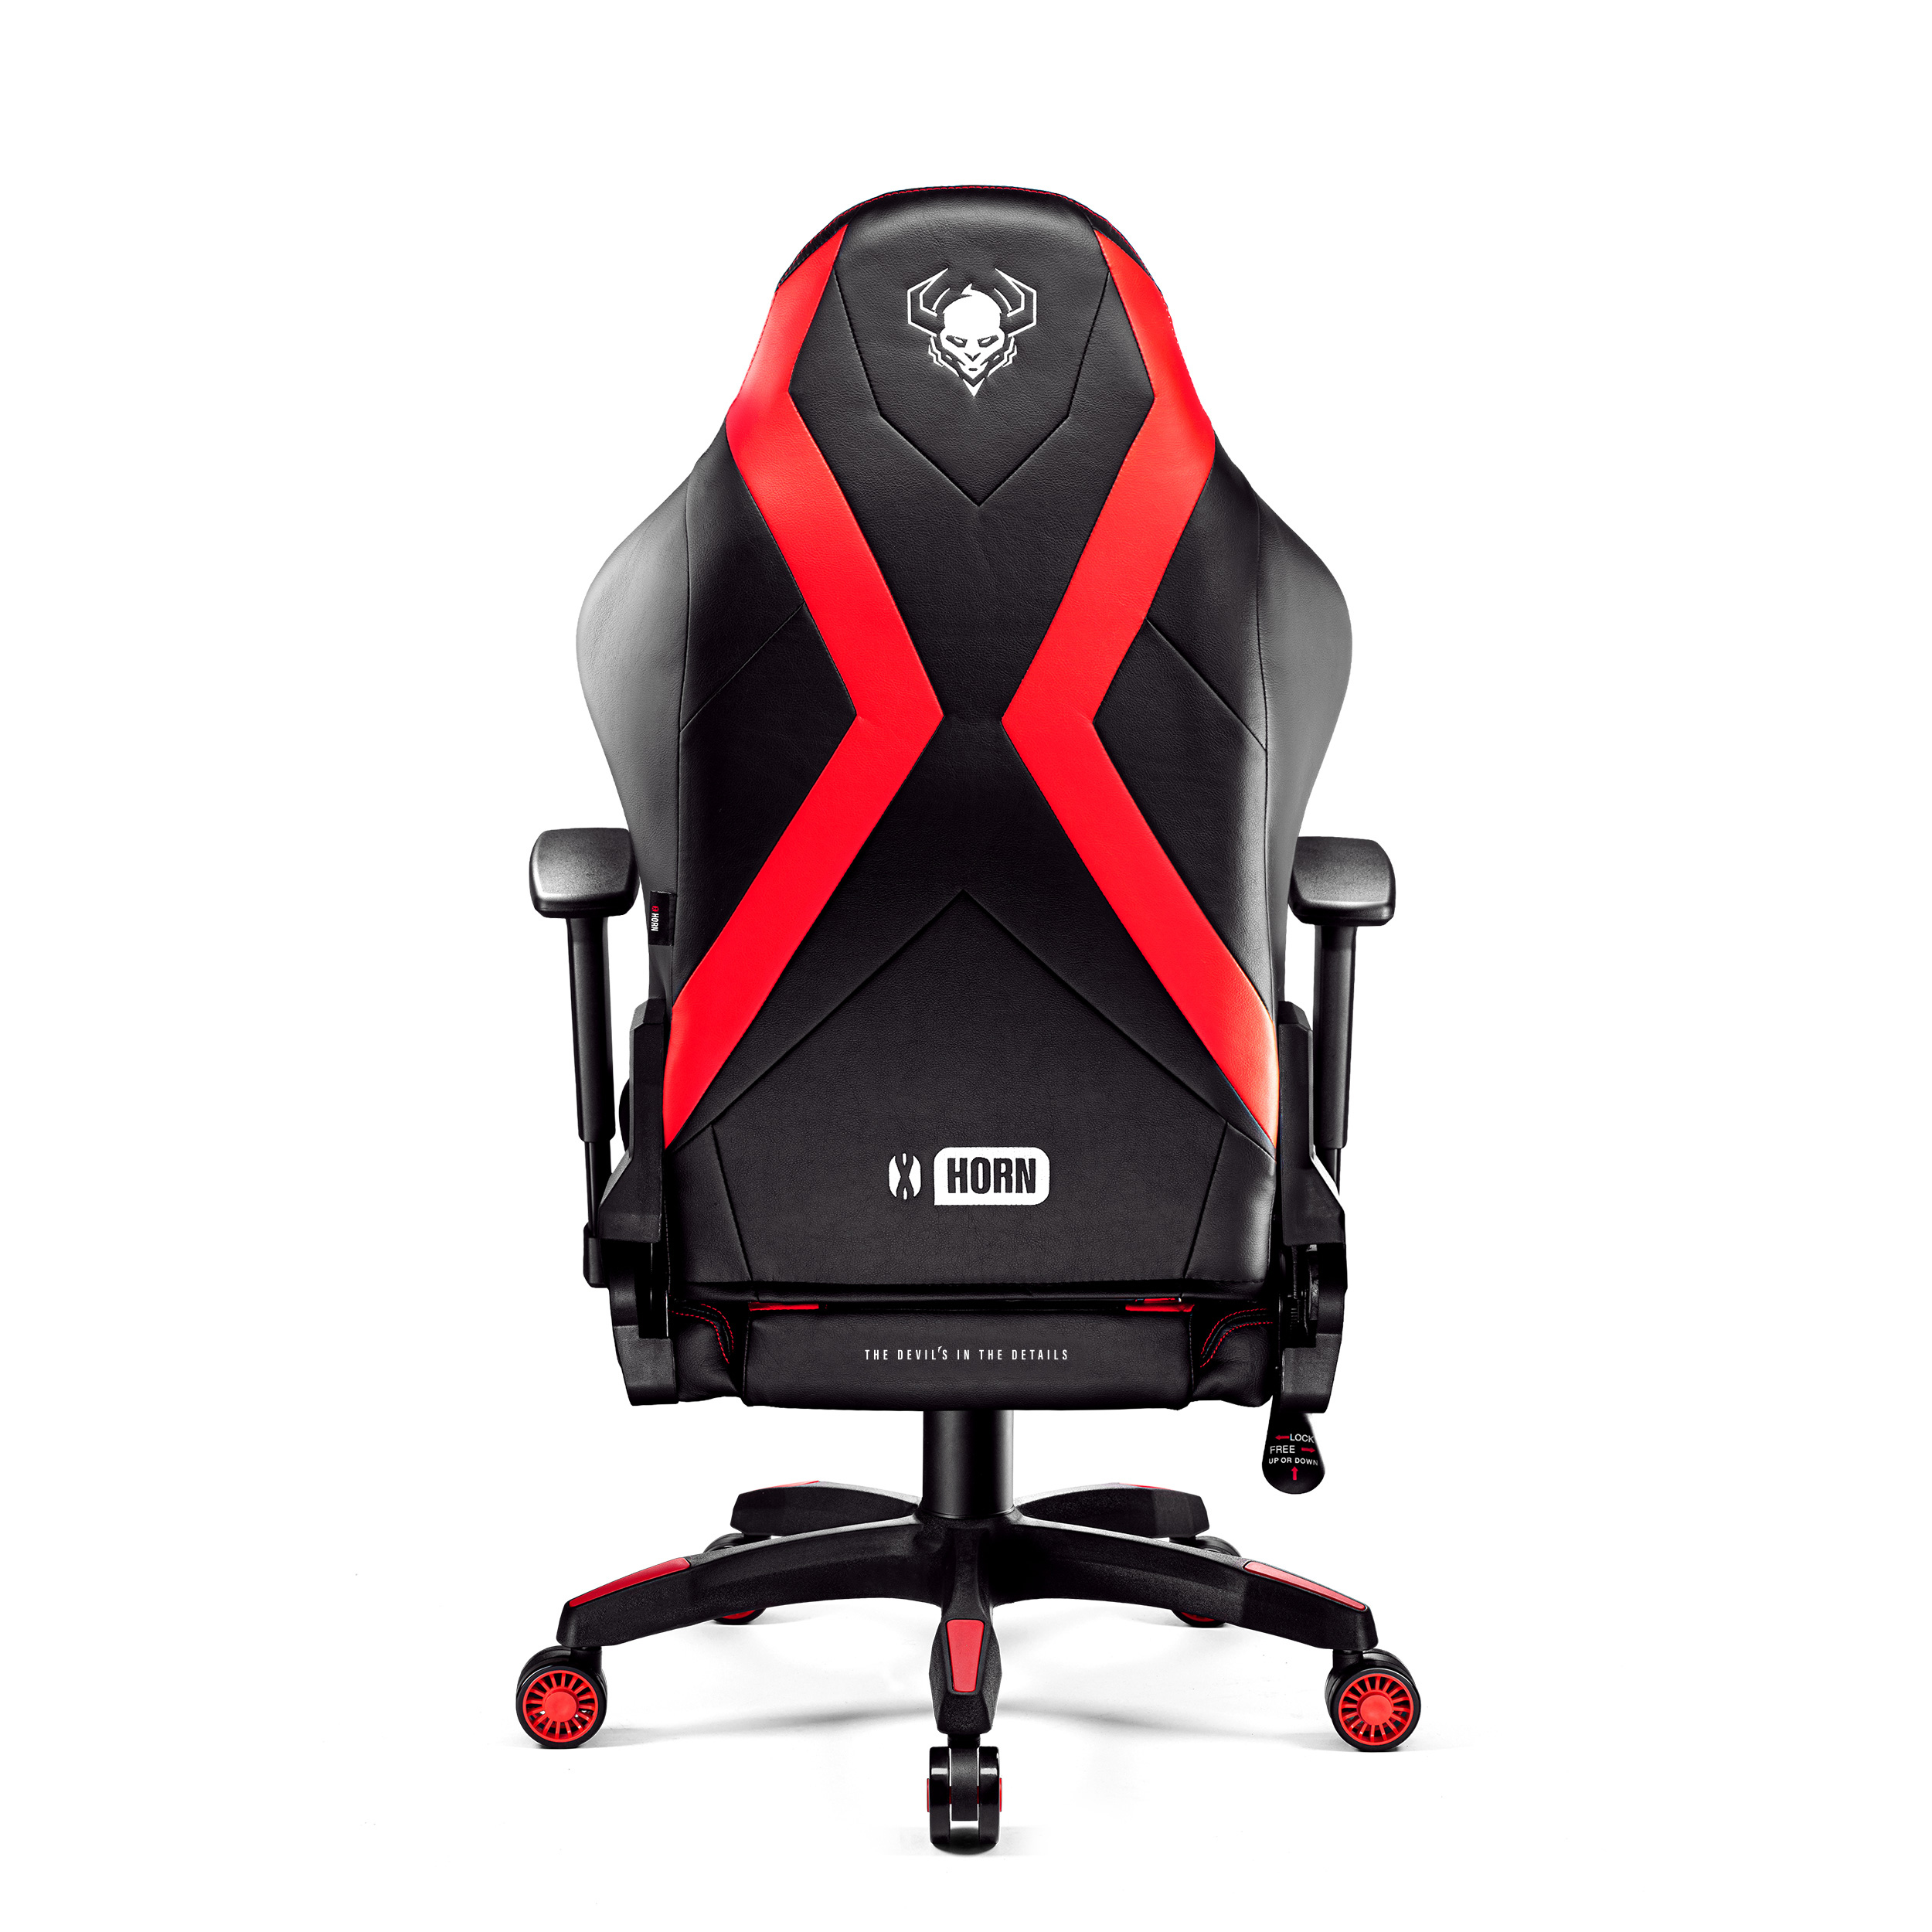 Gaming 2.0 CHAIRS GAMING NORMAL black/red DIABLO X-HORN STUHL Chair,